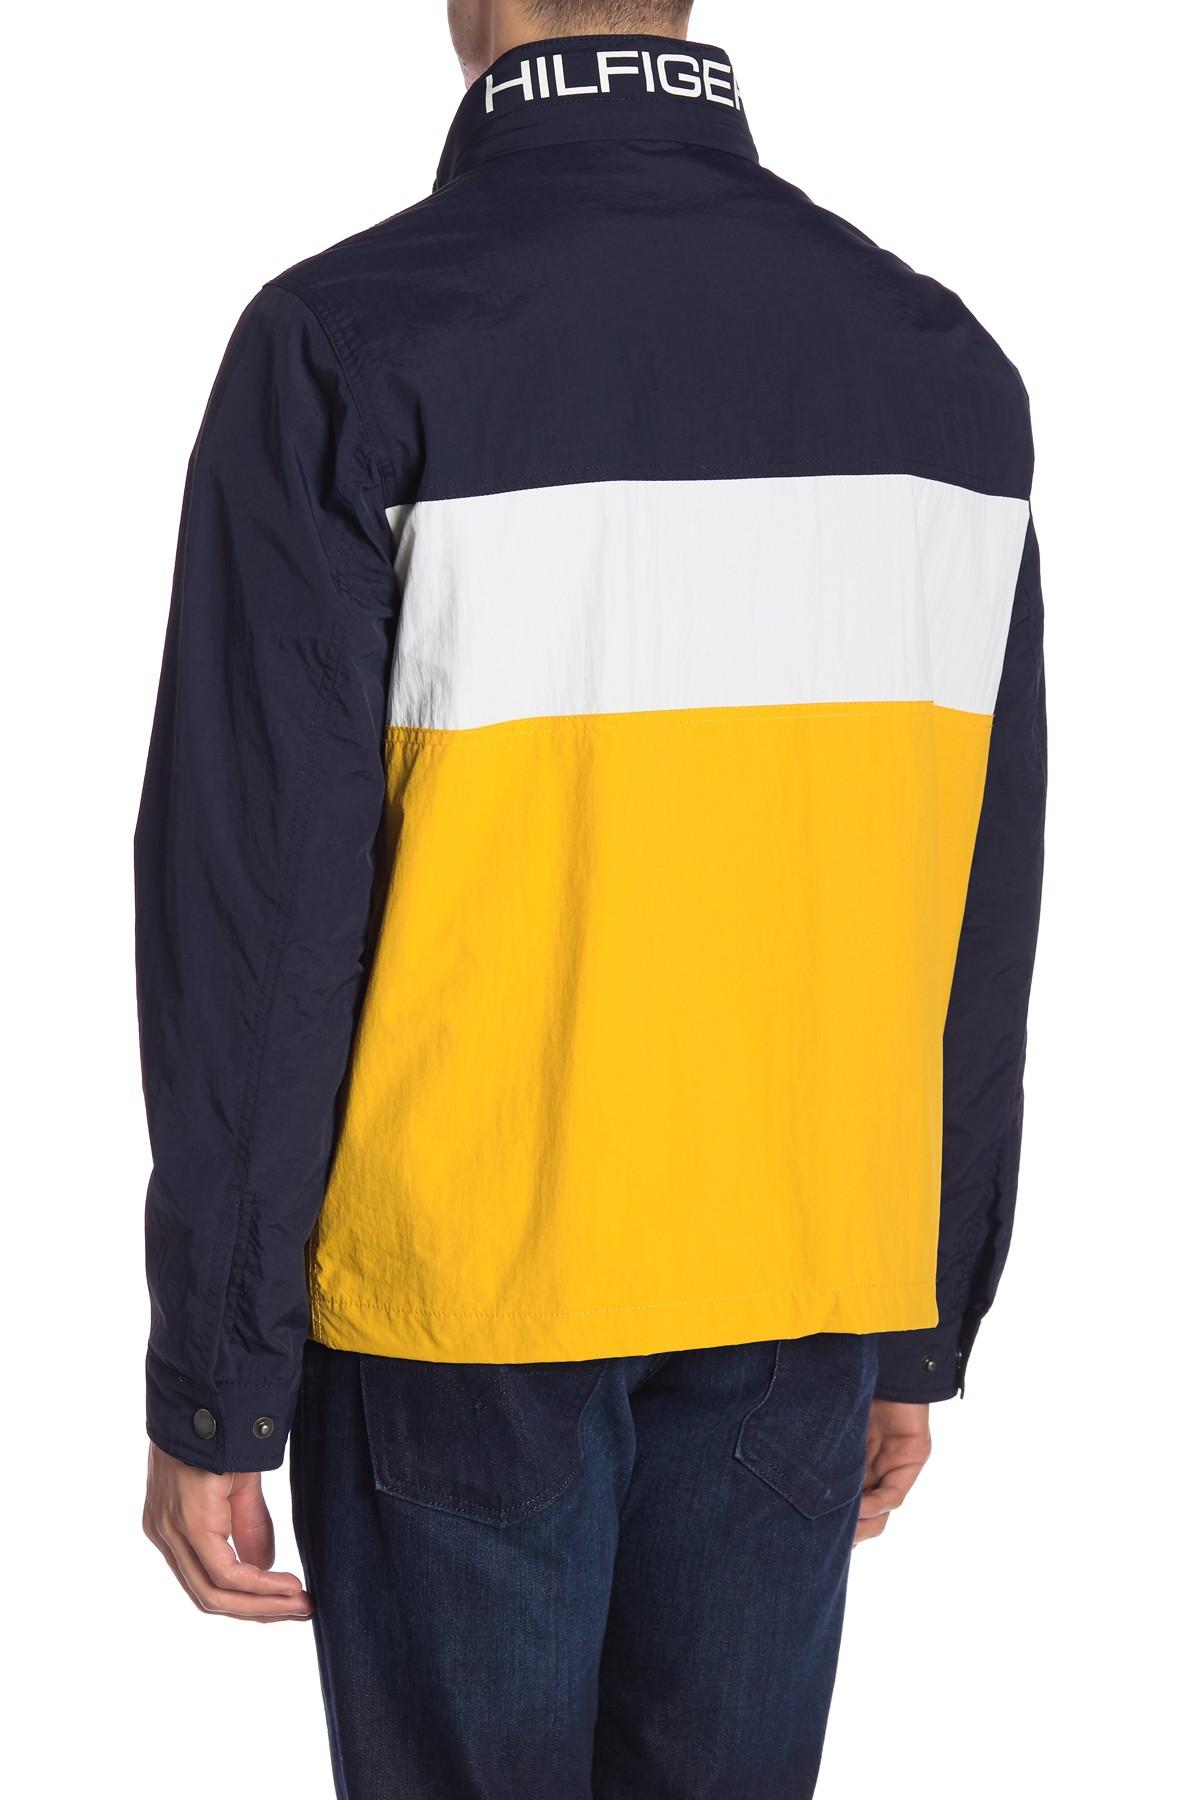 tommy hilfiger jacket yellow red and blue